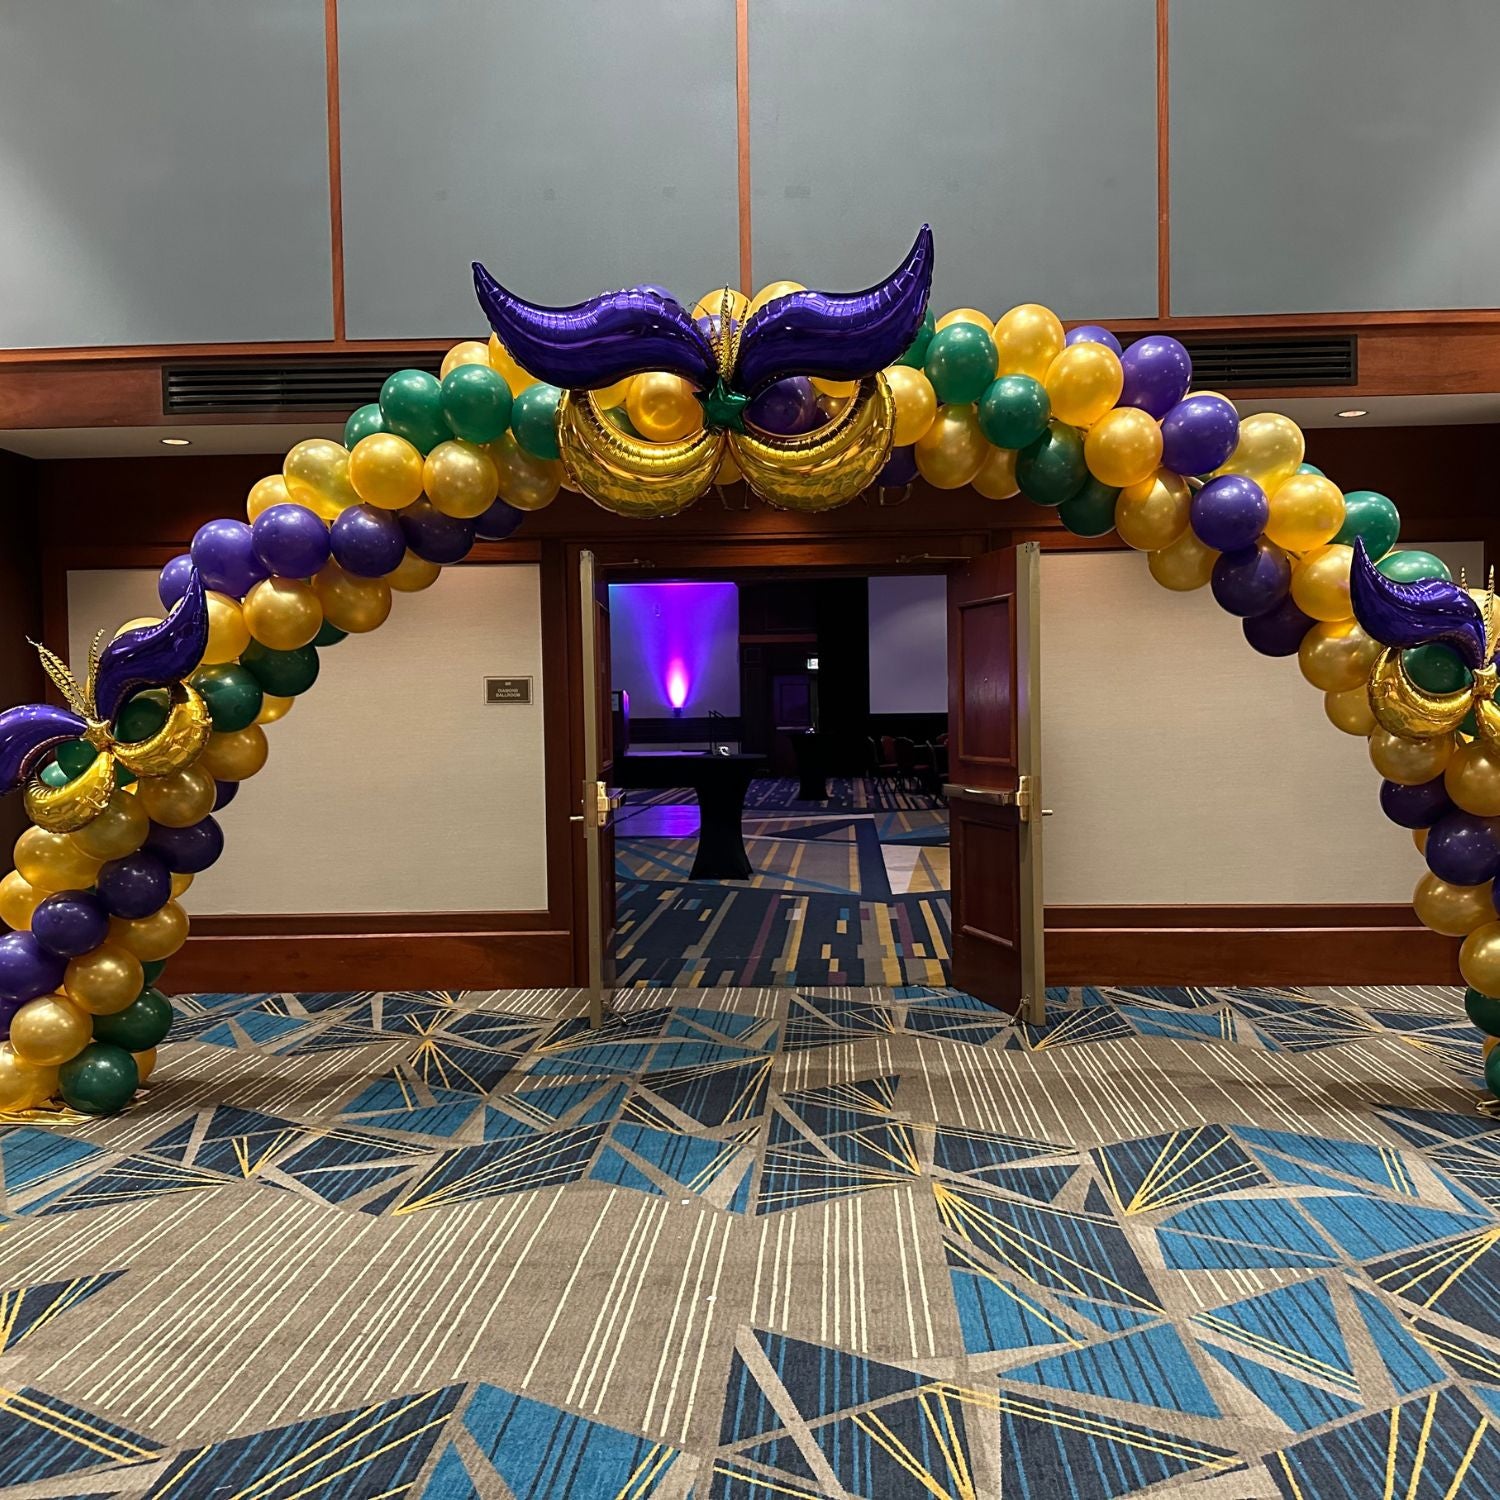 My Custom Balloons  Traditional Balloon Arches 22 ft long